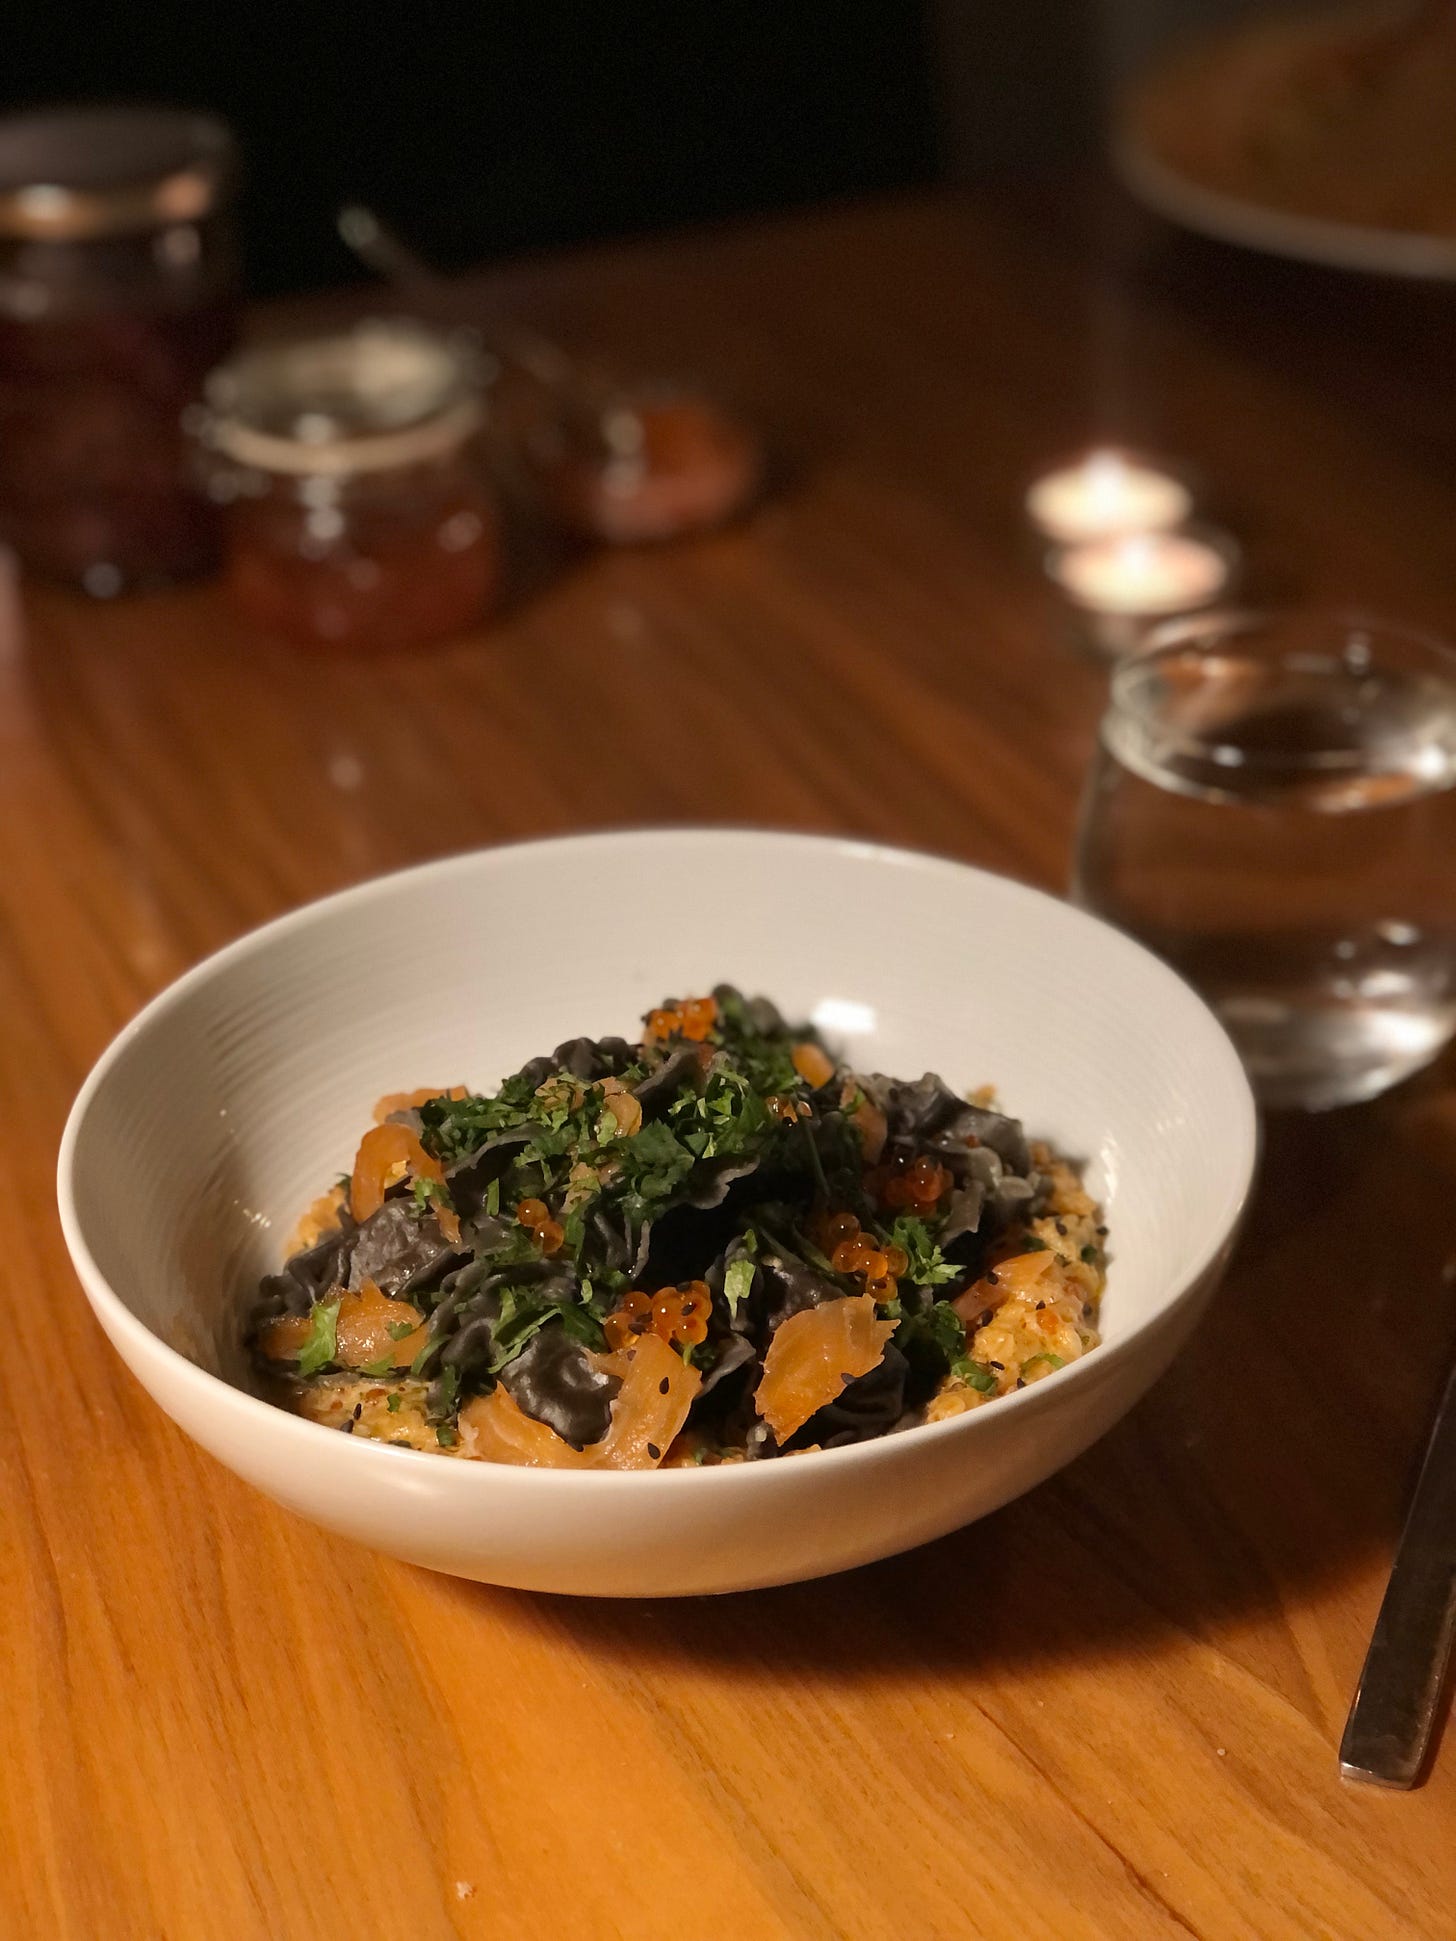 A white poreclain bowl on a wooden table, with a melange unidentifiable bits, some warm browns, some bright orange small spheres, some raggedy black pasta, some coriander. 